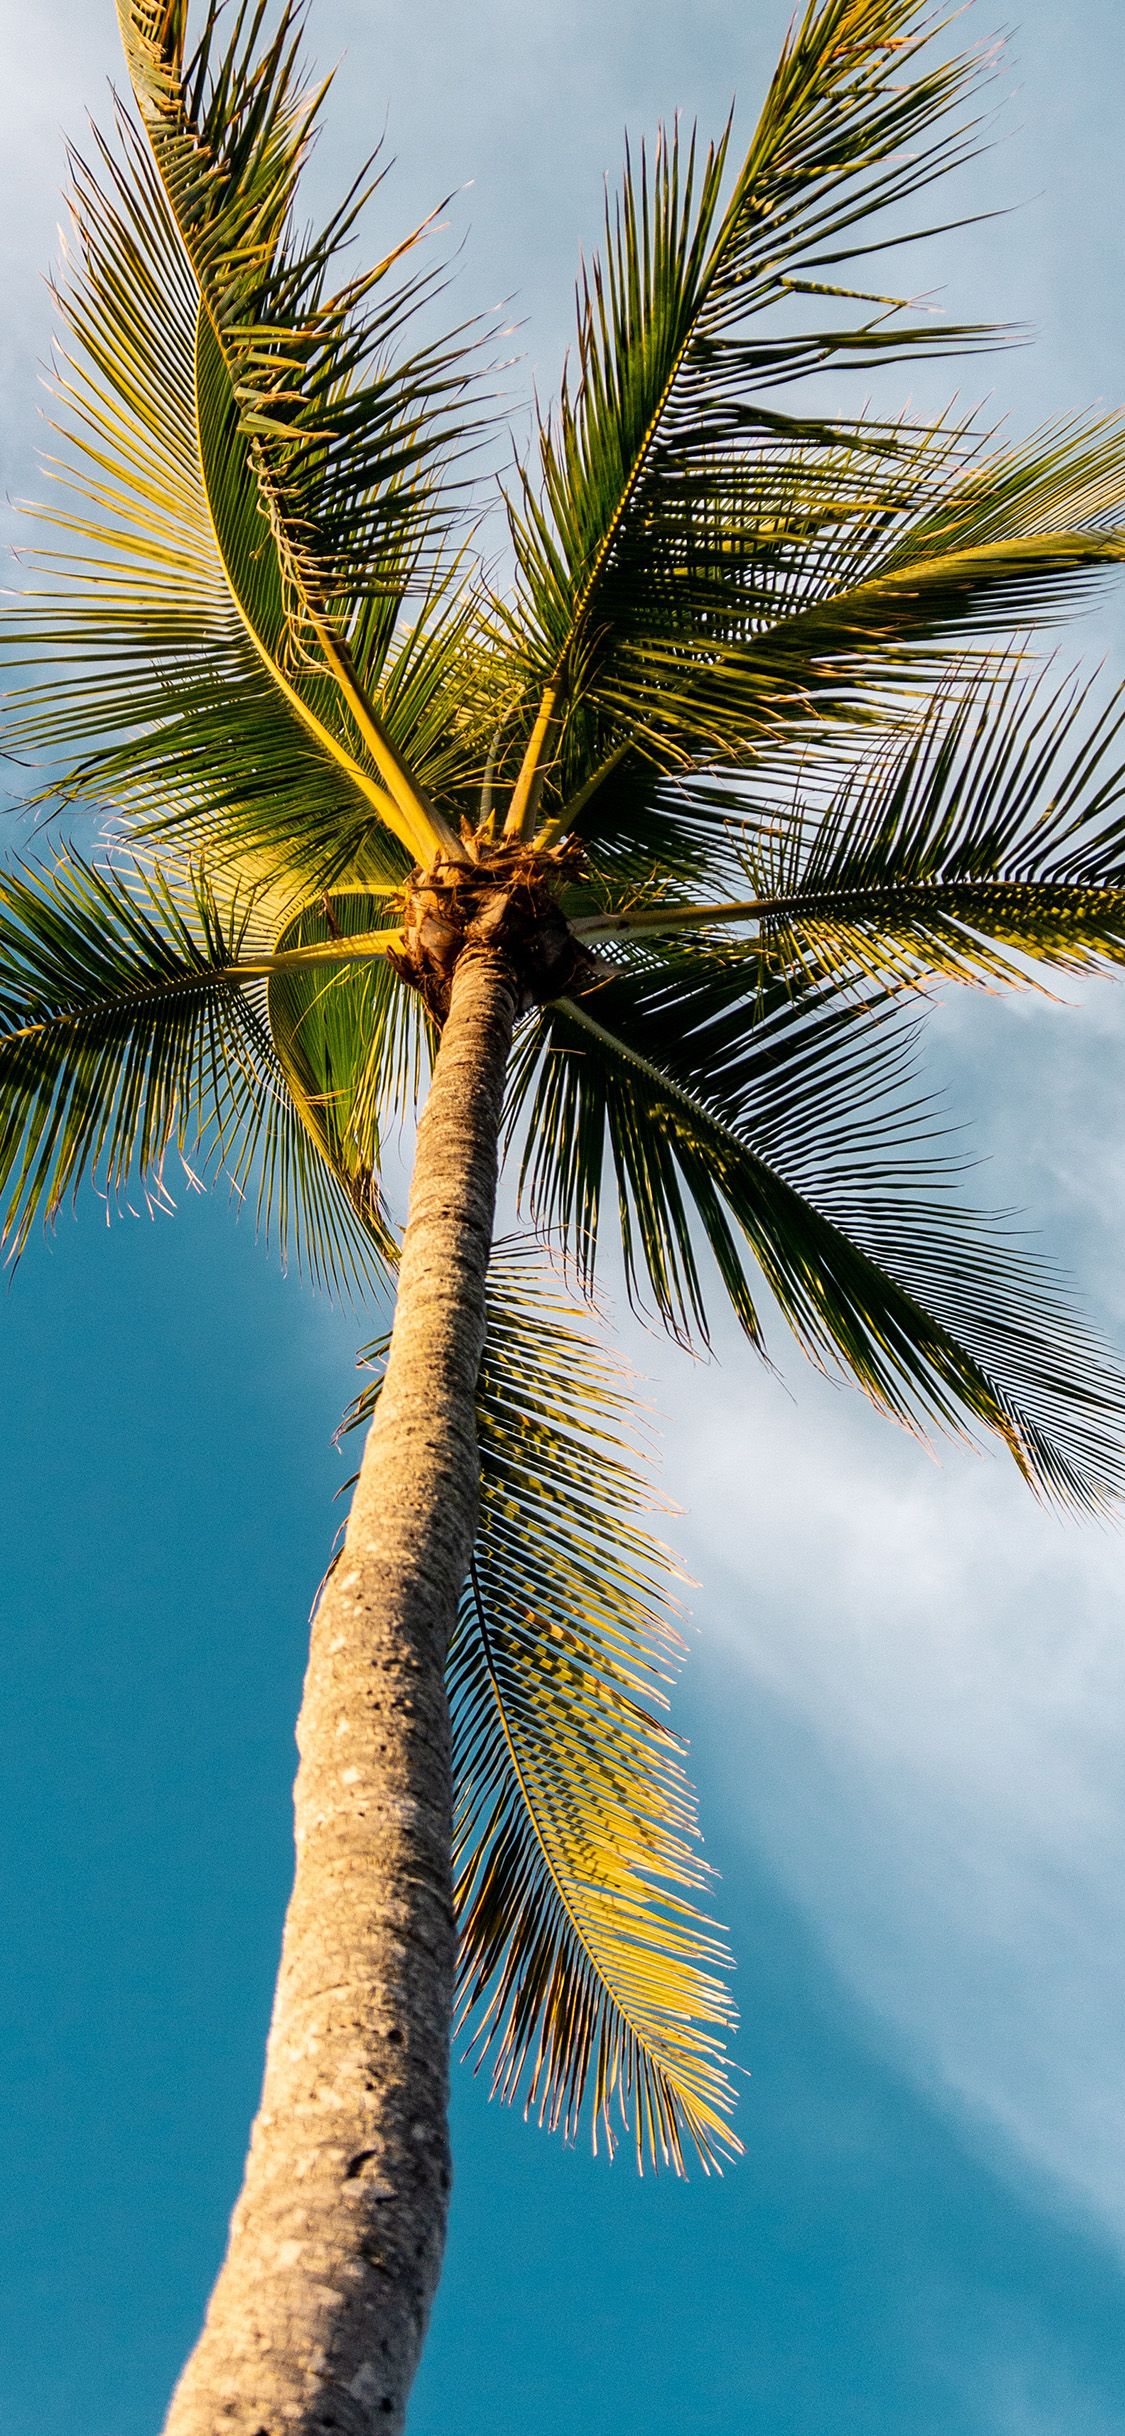 iPhone X wallpaper. tree summer palm sky sunny nature